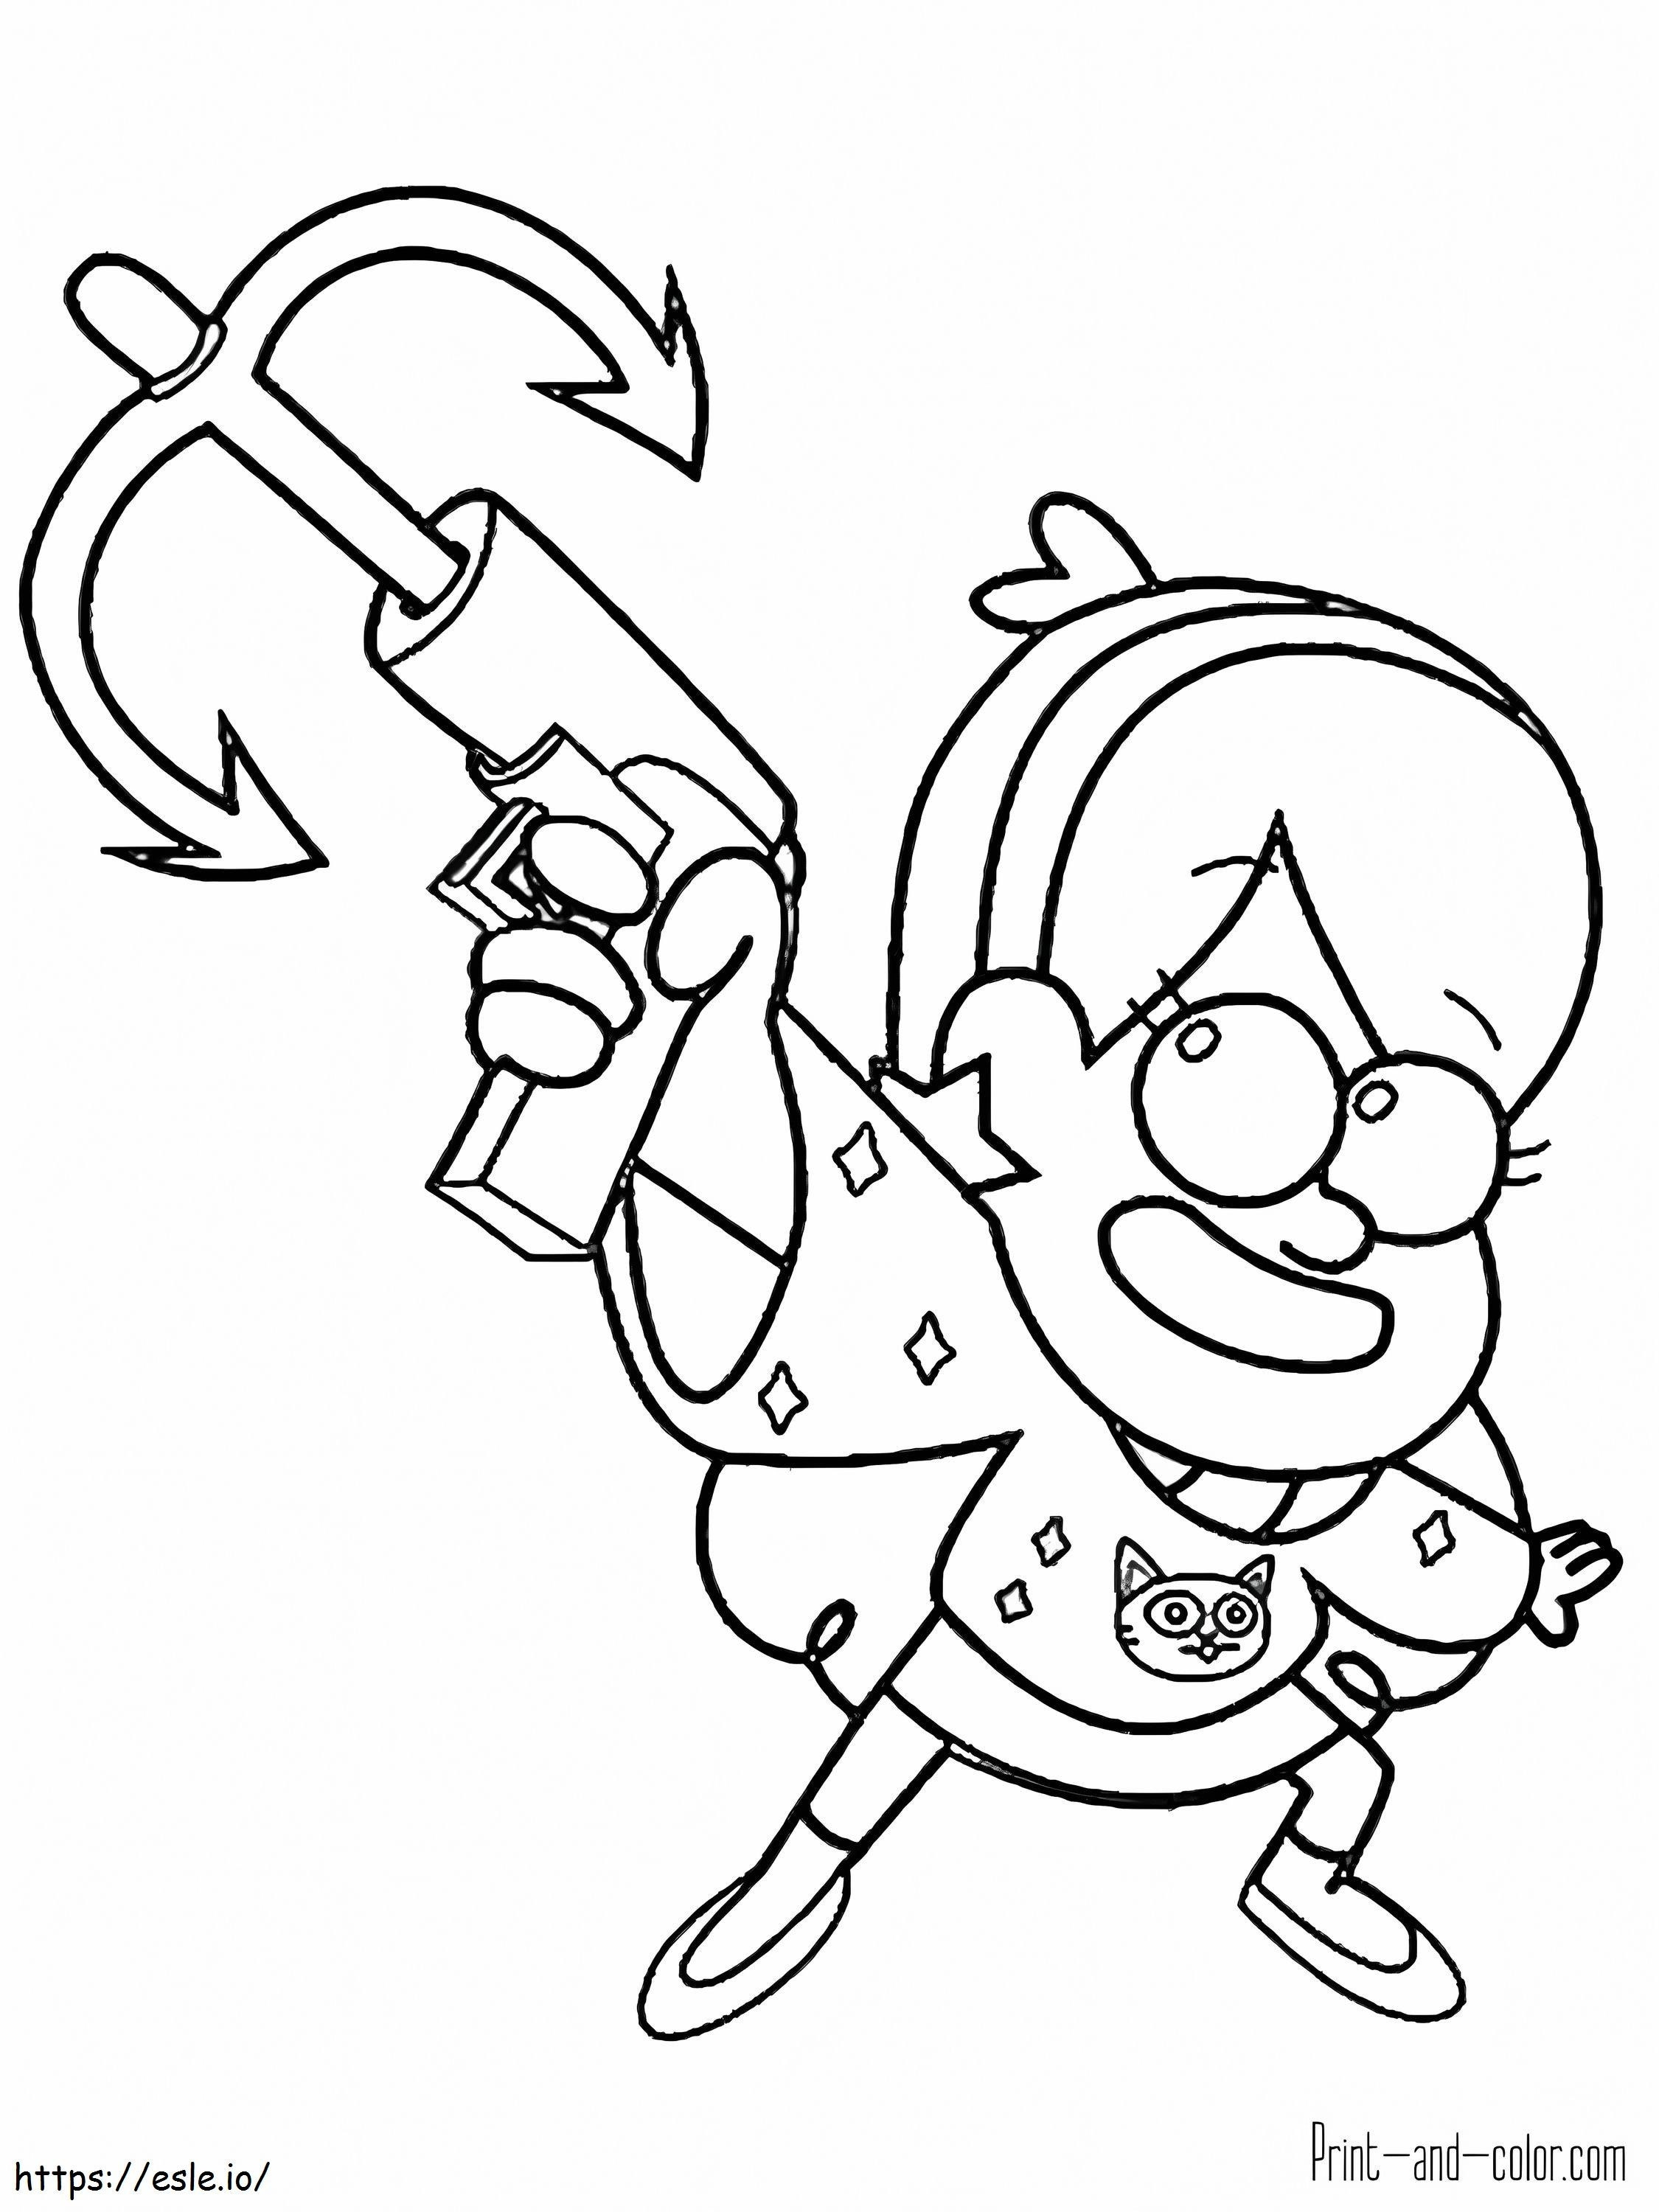 Gravity_Falls_002 coloring page